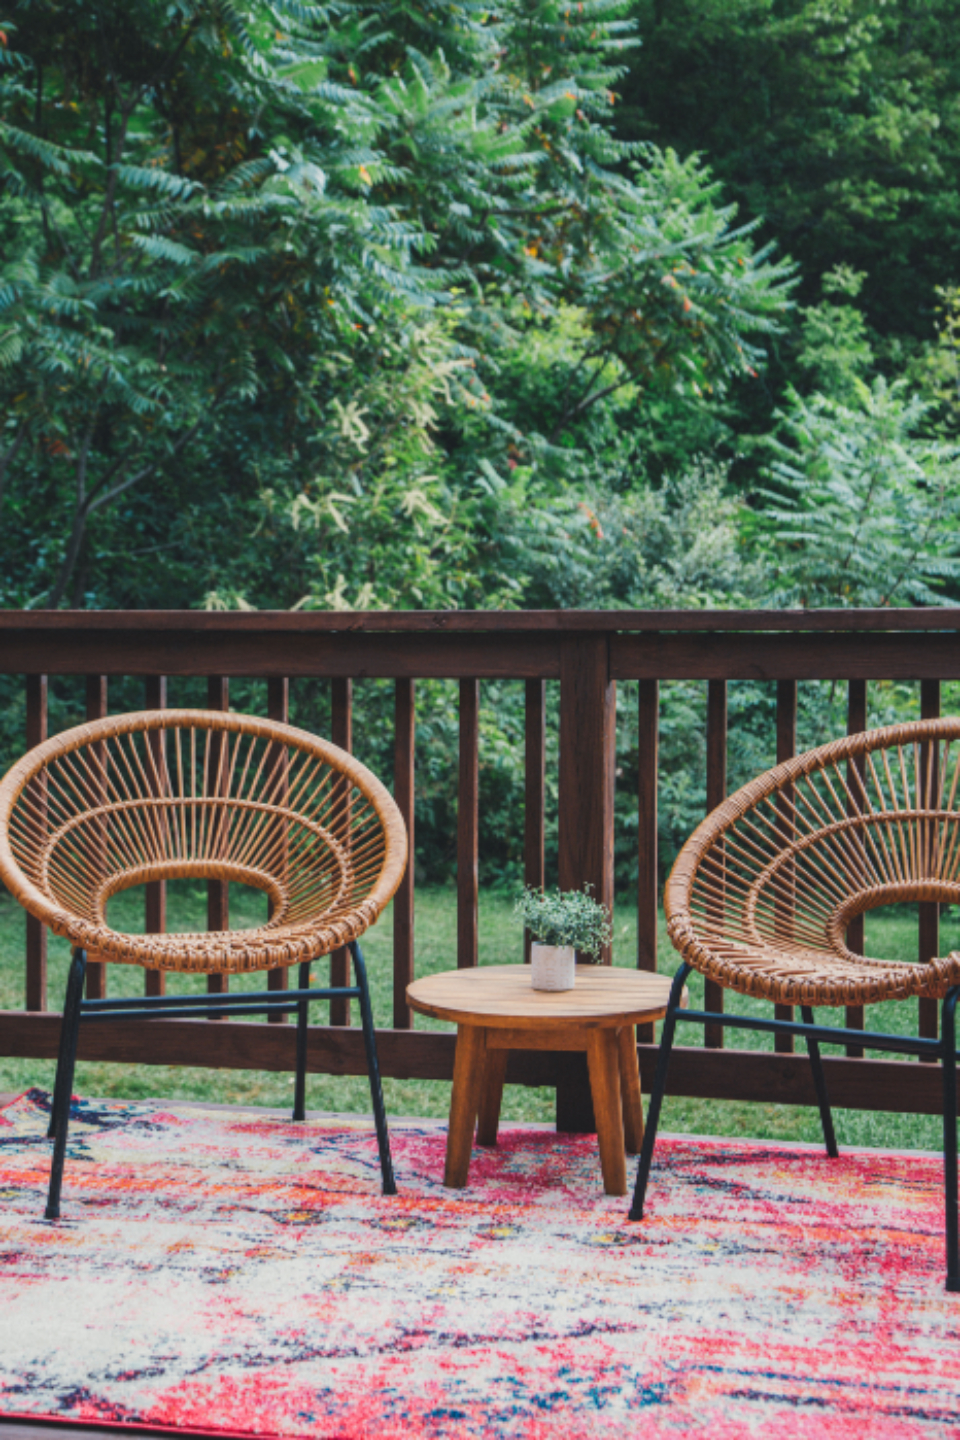 Best Patio Furniture for Garden Spaces: Top Picks and Buying Guide